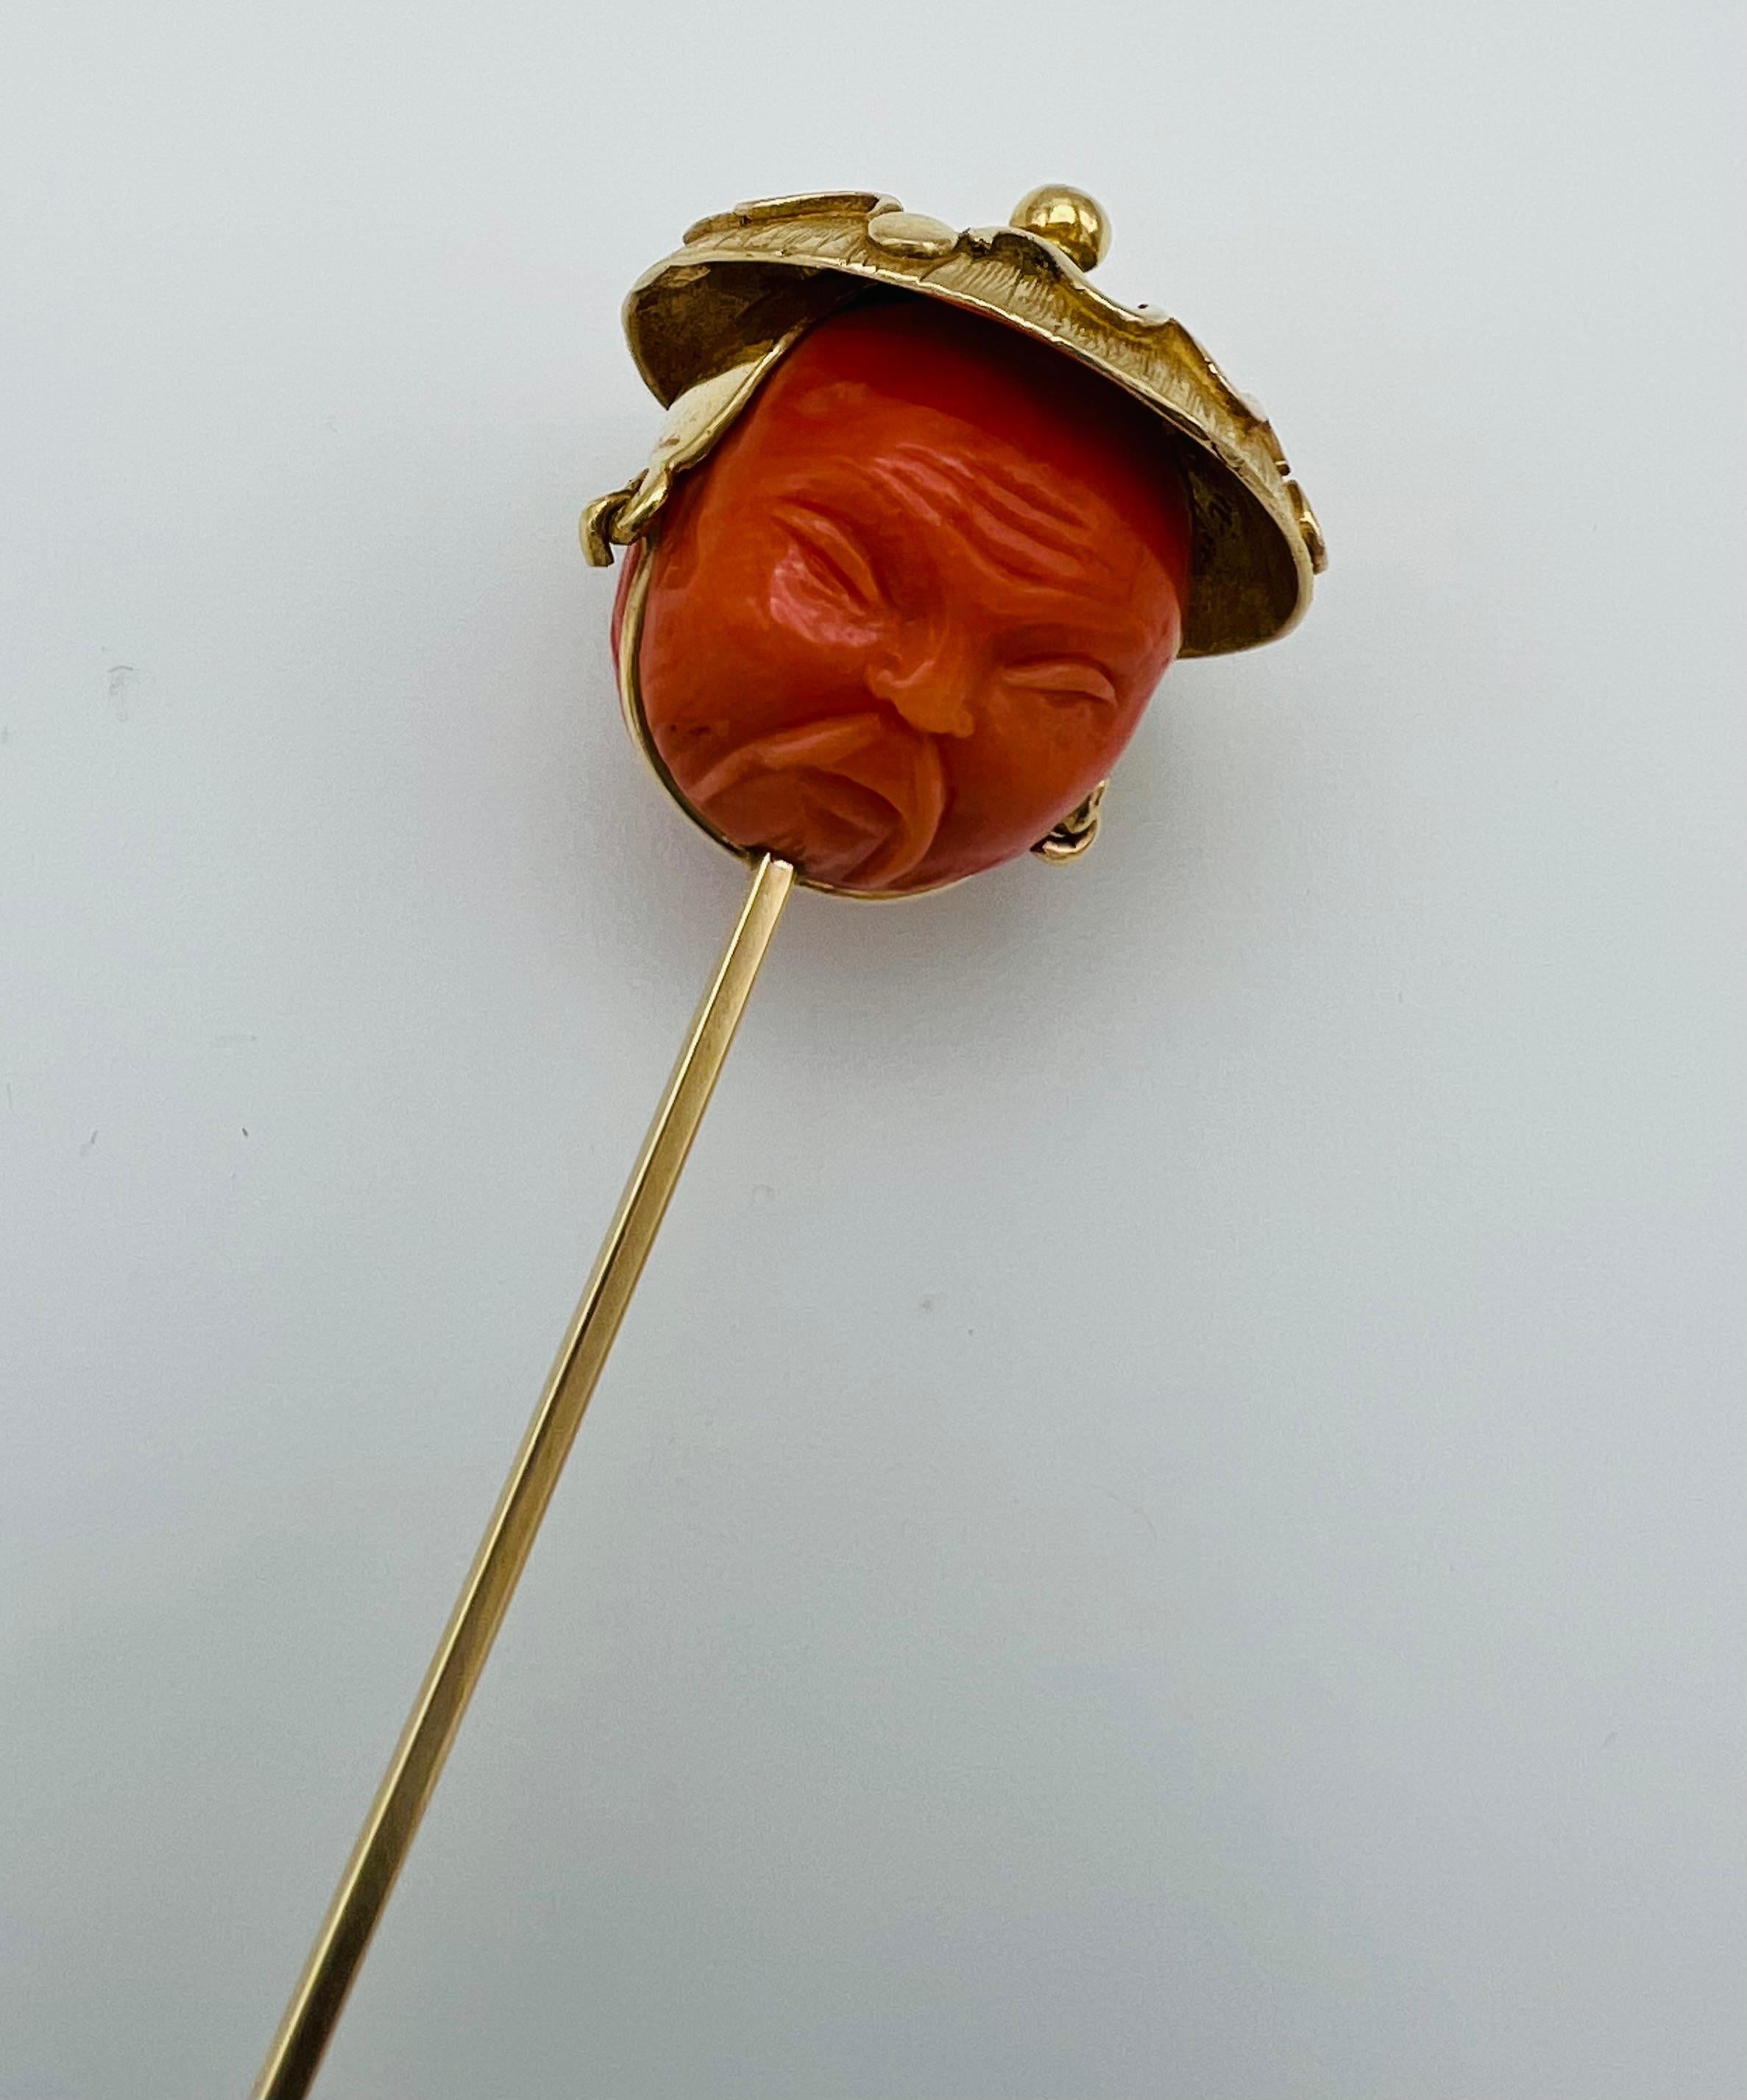 Product details:

The pin is made out of yellow gold and carved coral. It features Asian motif.